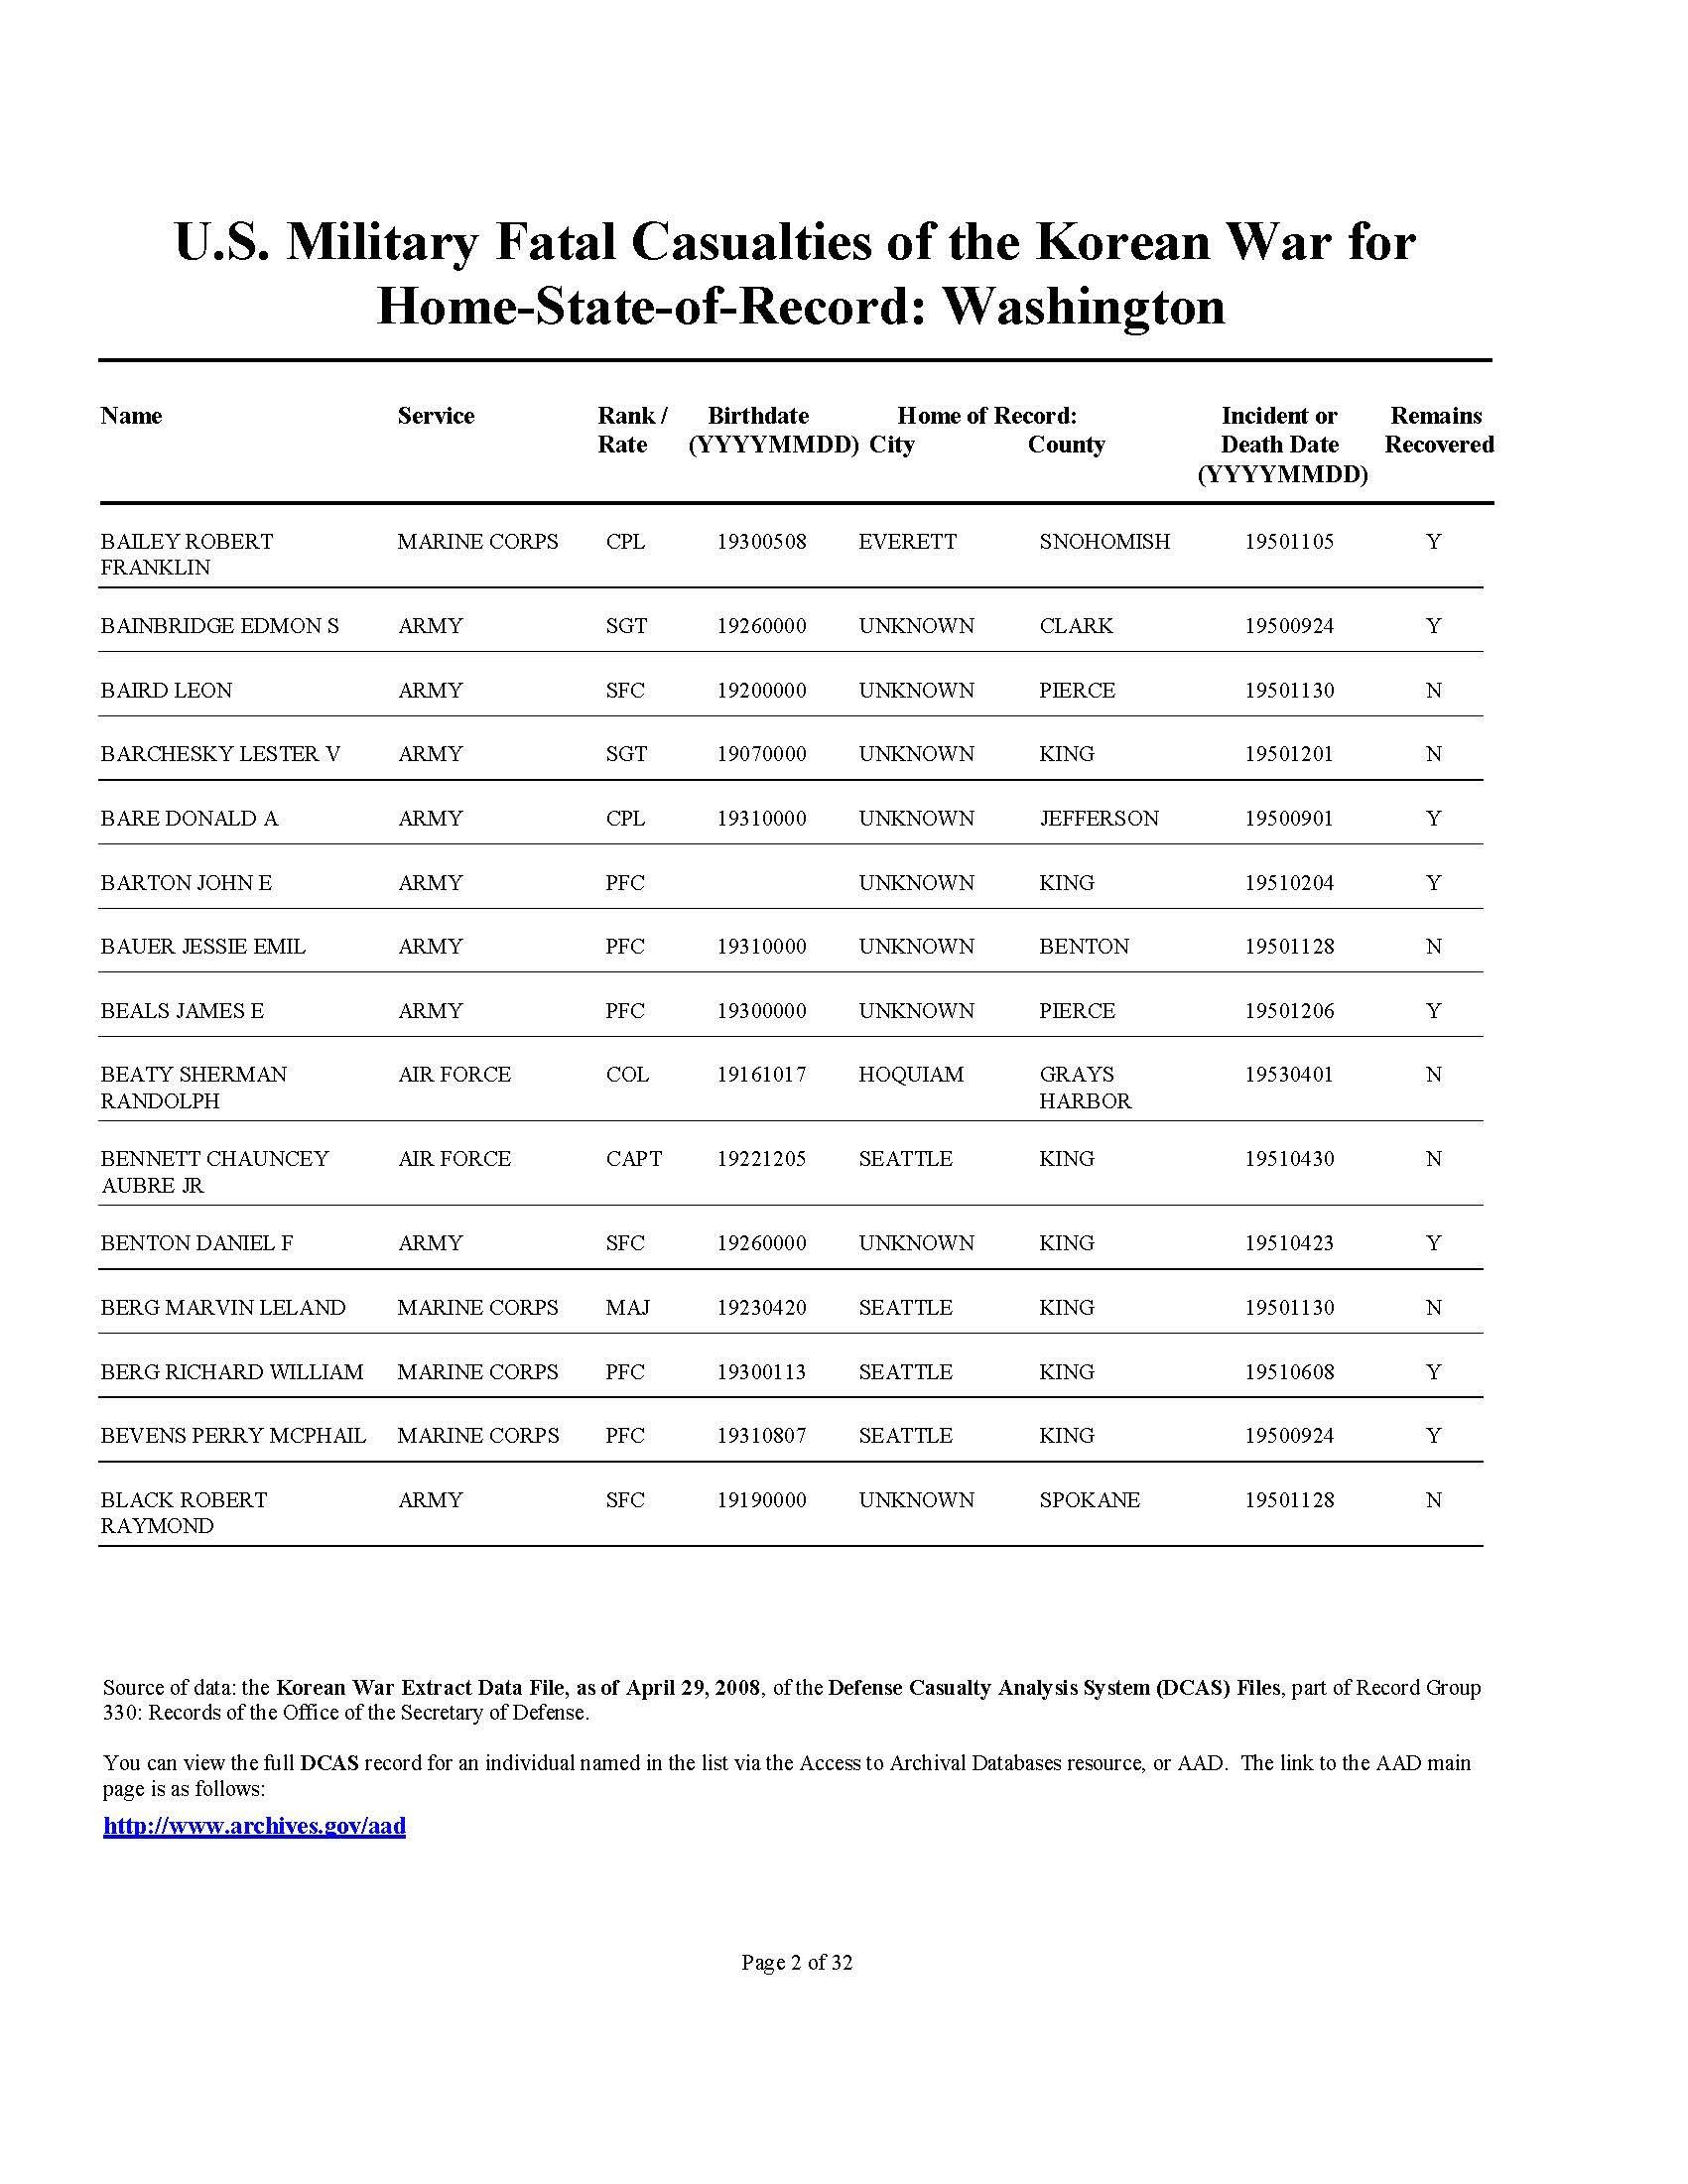 WA State Korean War Casualty List By Name [4]